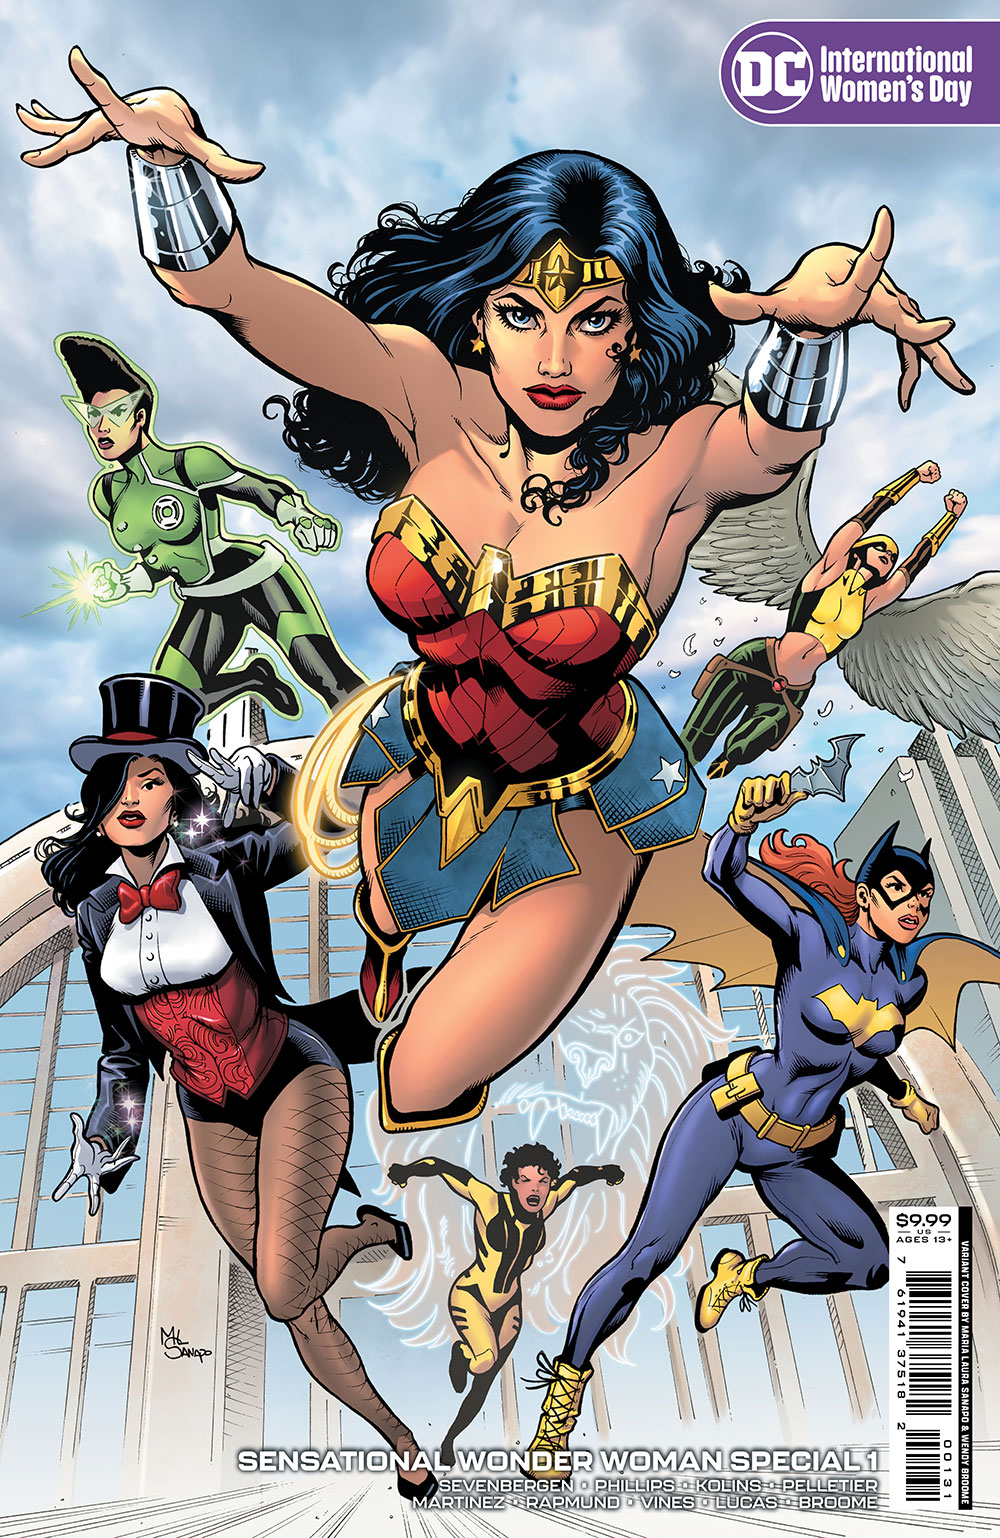 Sensational Wonder Woman Special #1 (One Shot) Cover C Maria Laura Sanapo International Womens Day Variant